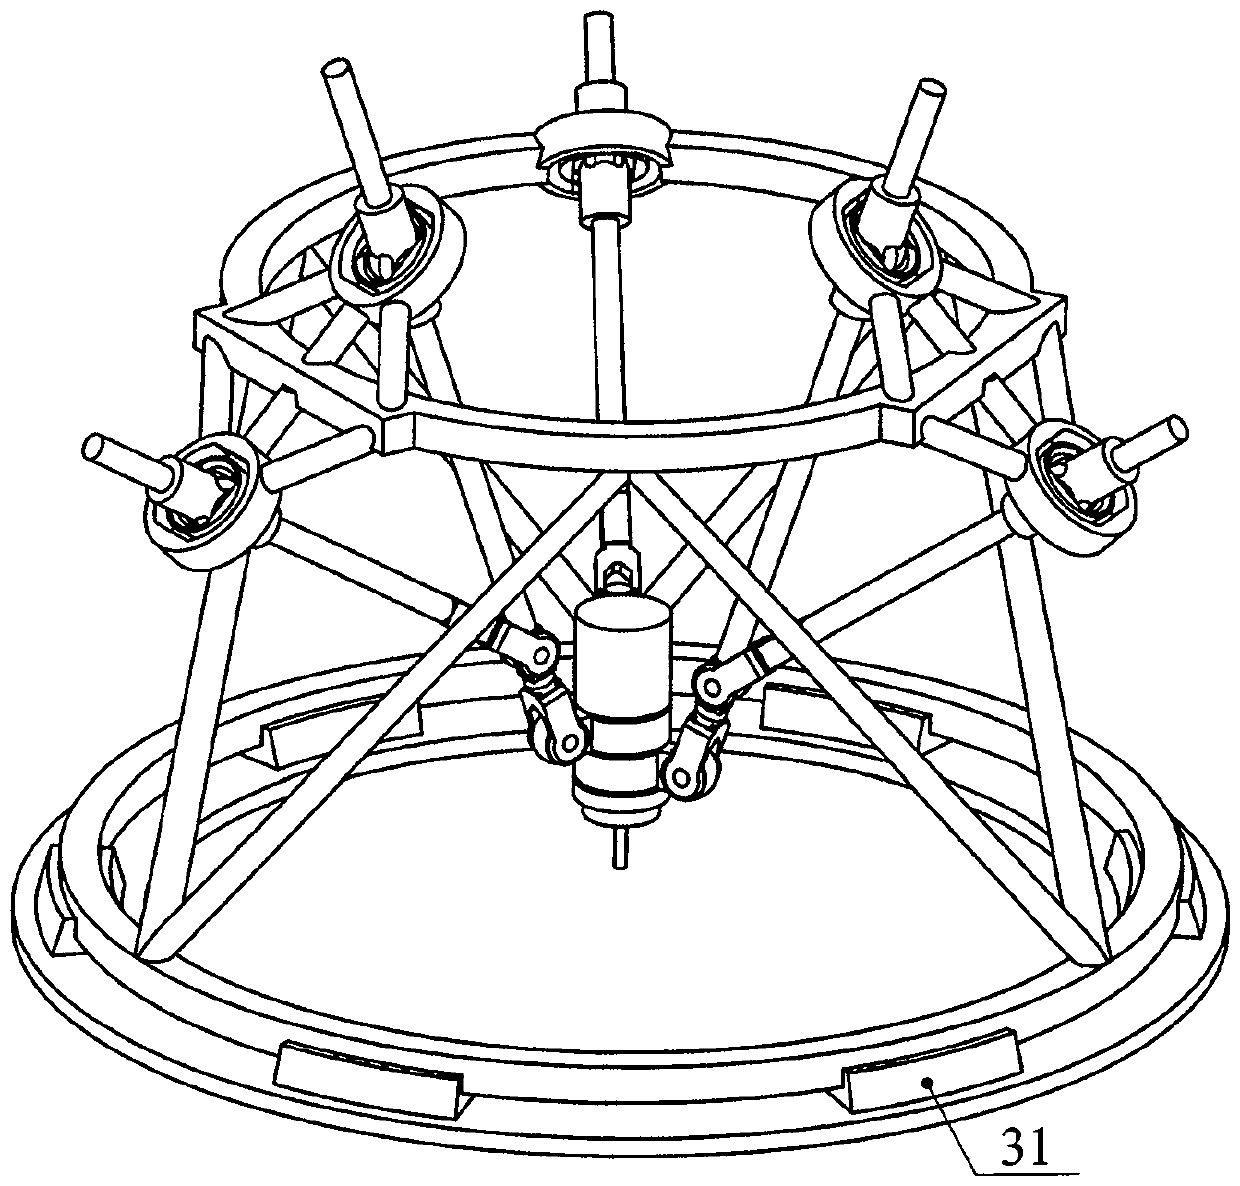 A multi-axis linkage device